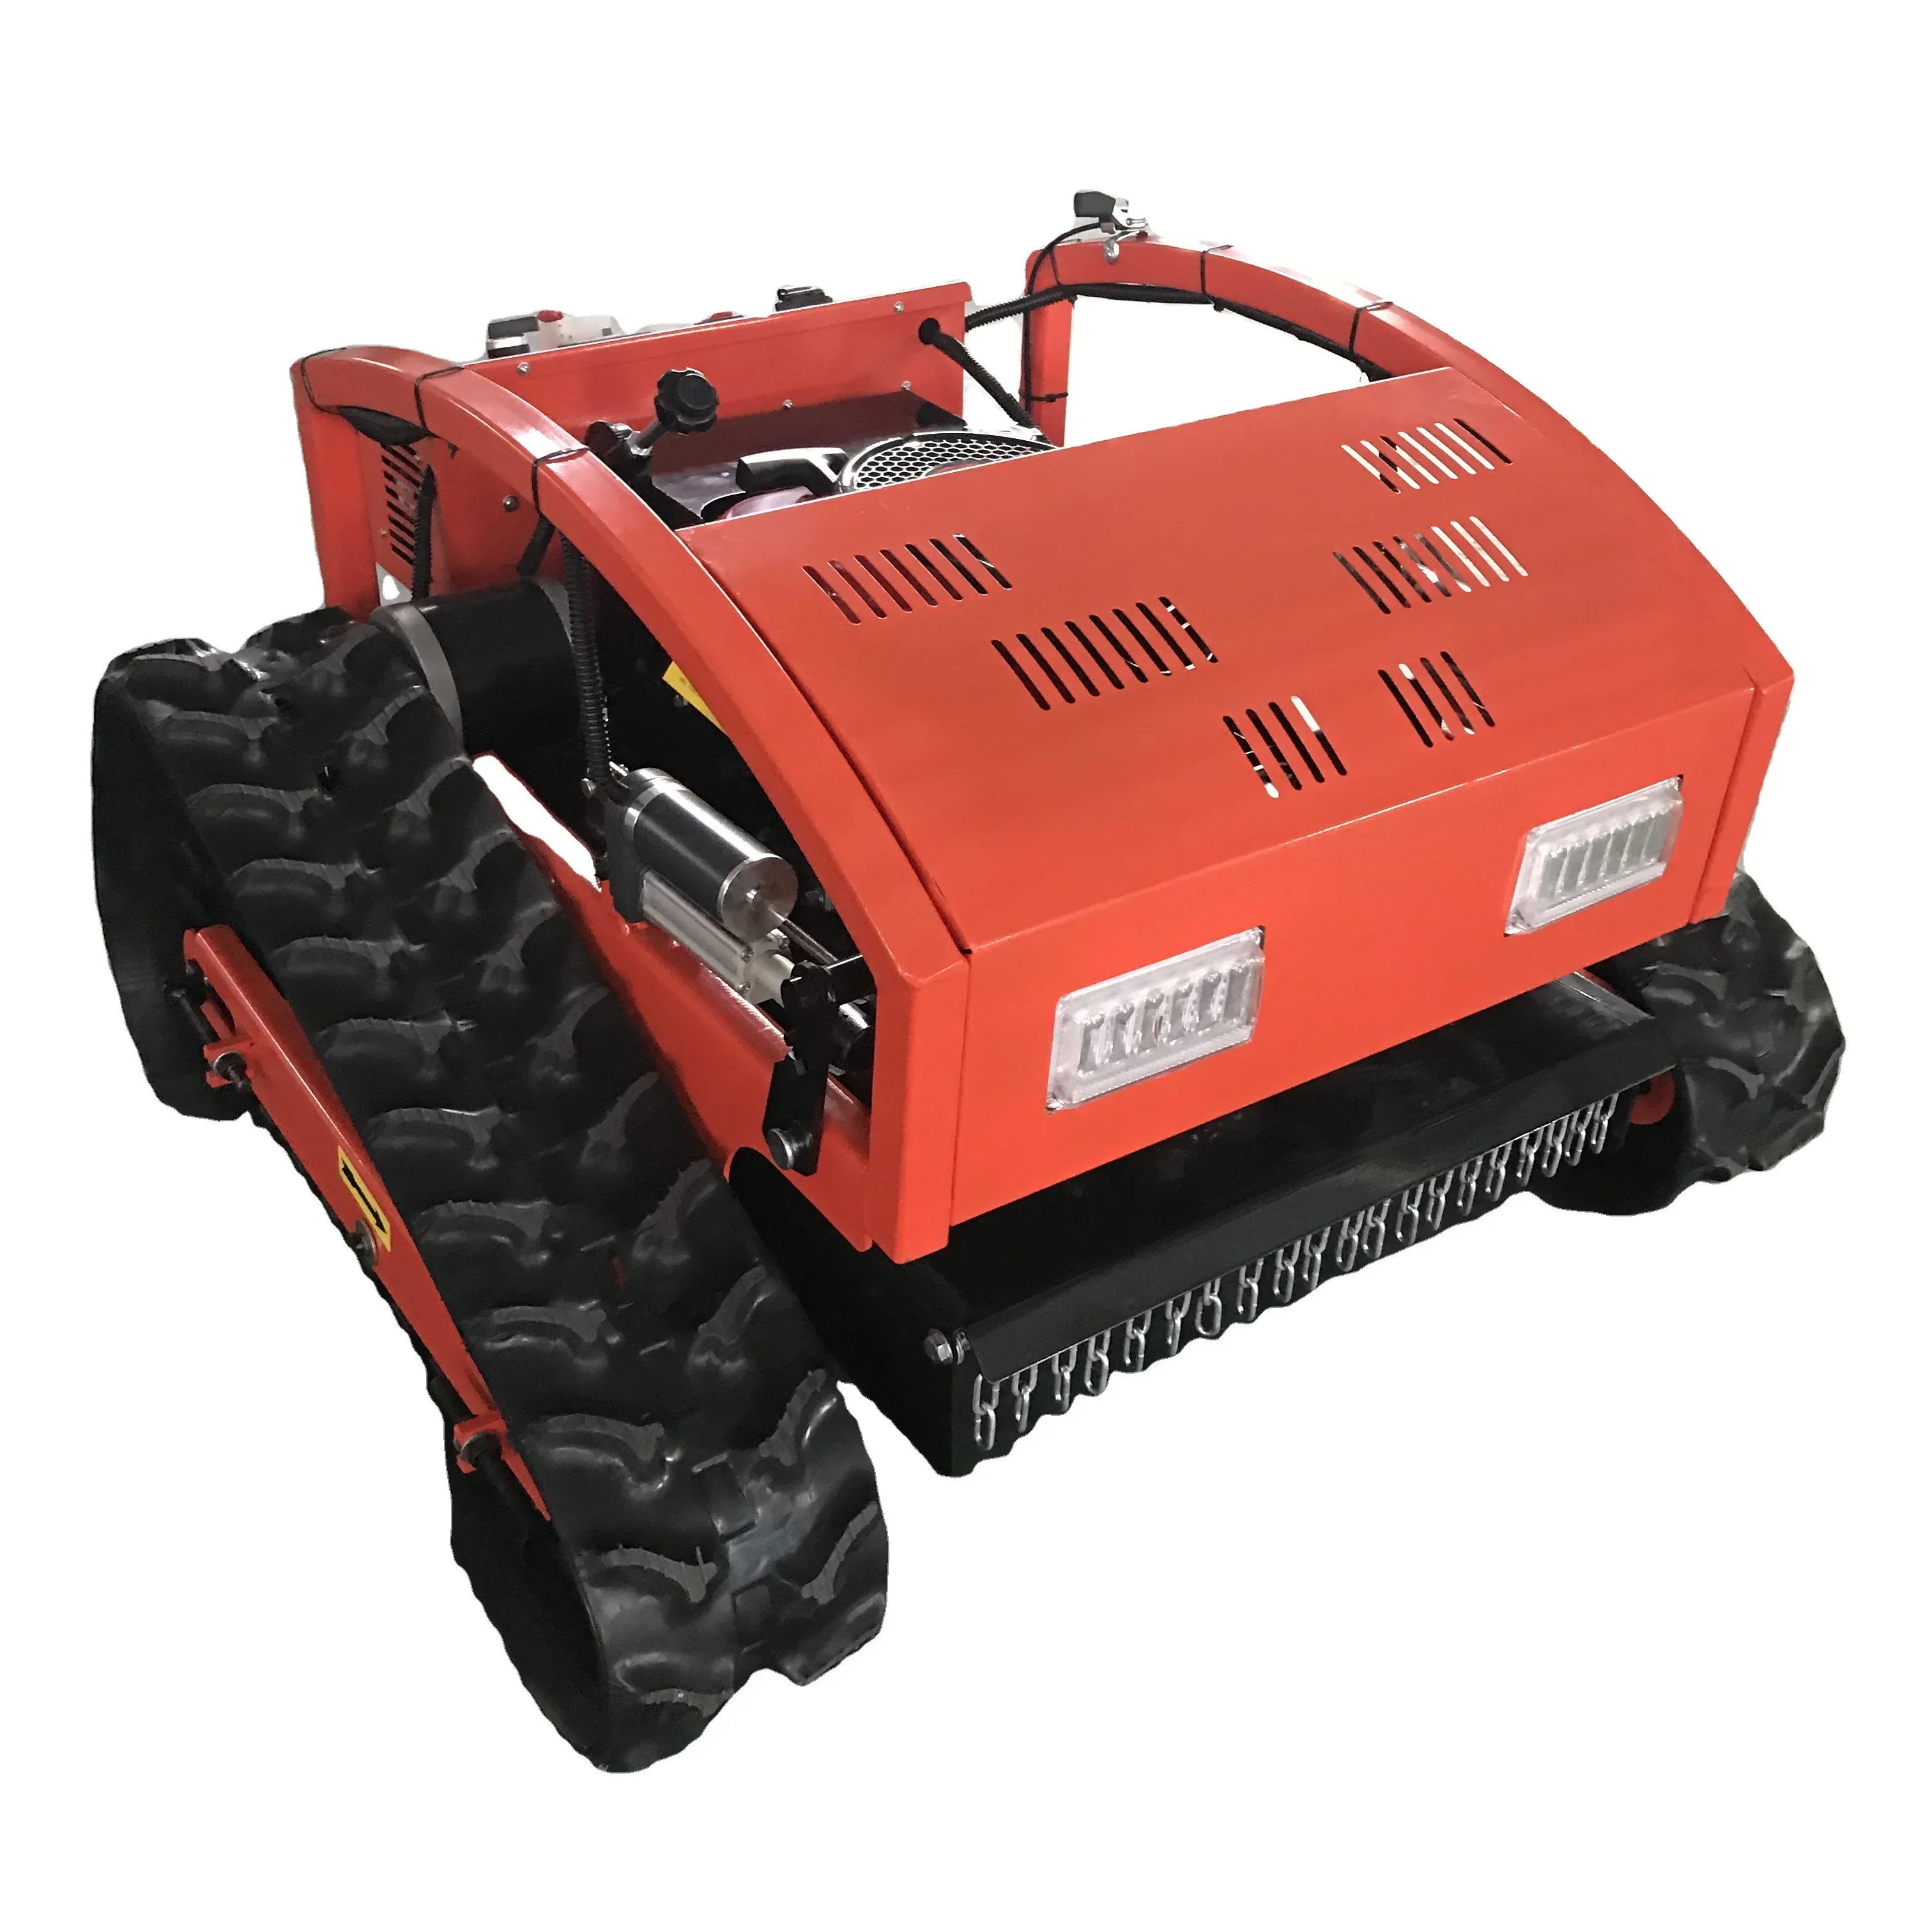 

Automatic lawn mower robot small crawler remote control Lawnmower mowing machine cropper grass cutter cutting